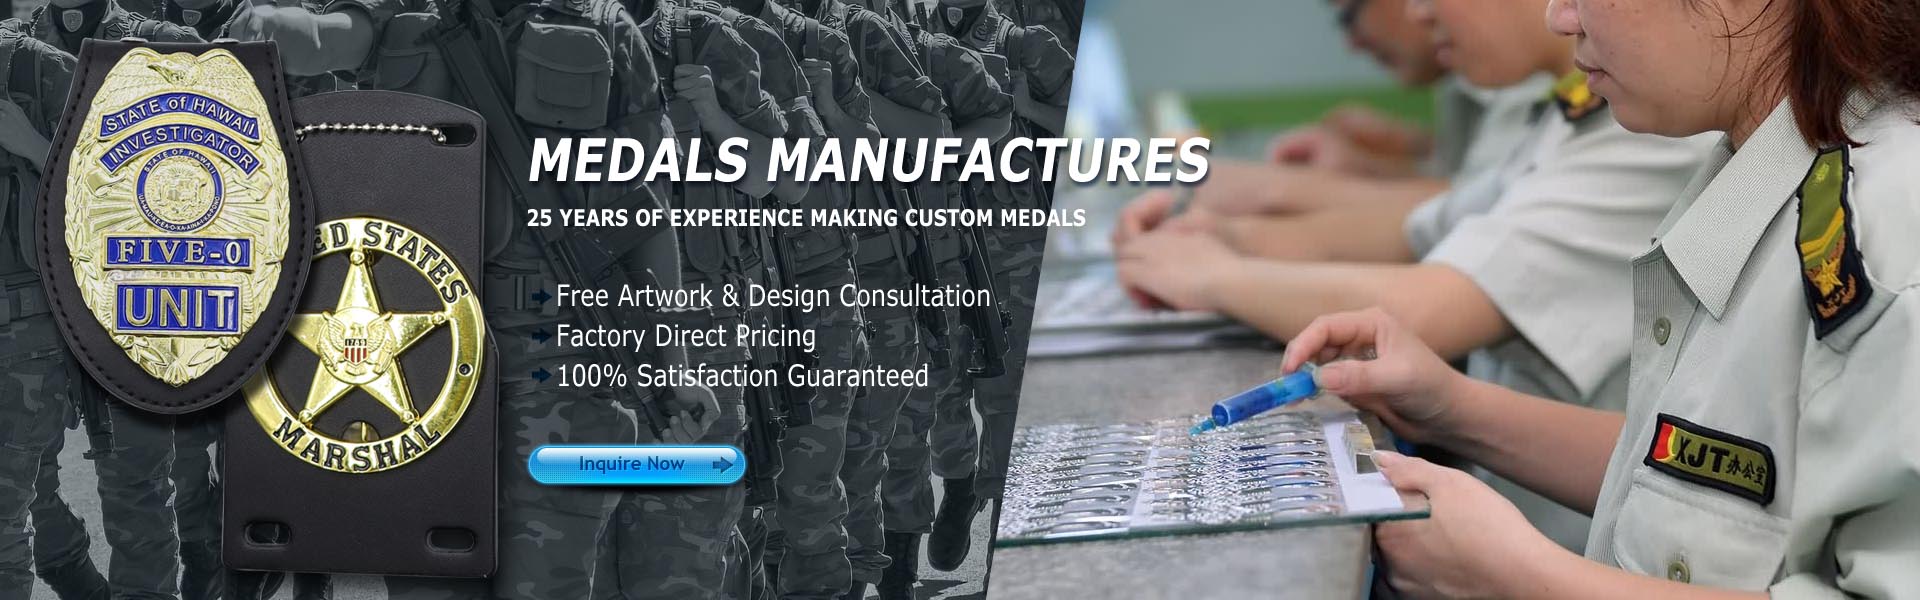 Custom Medals Suppliers & Manufactures